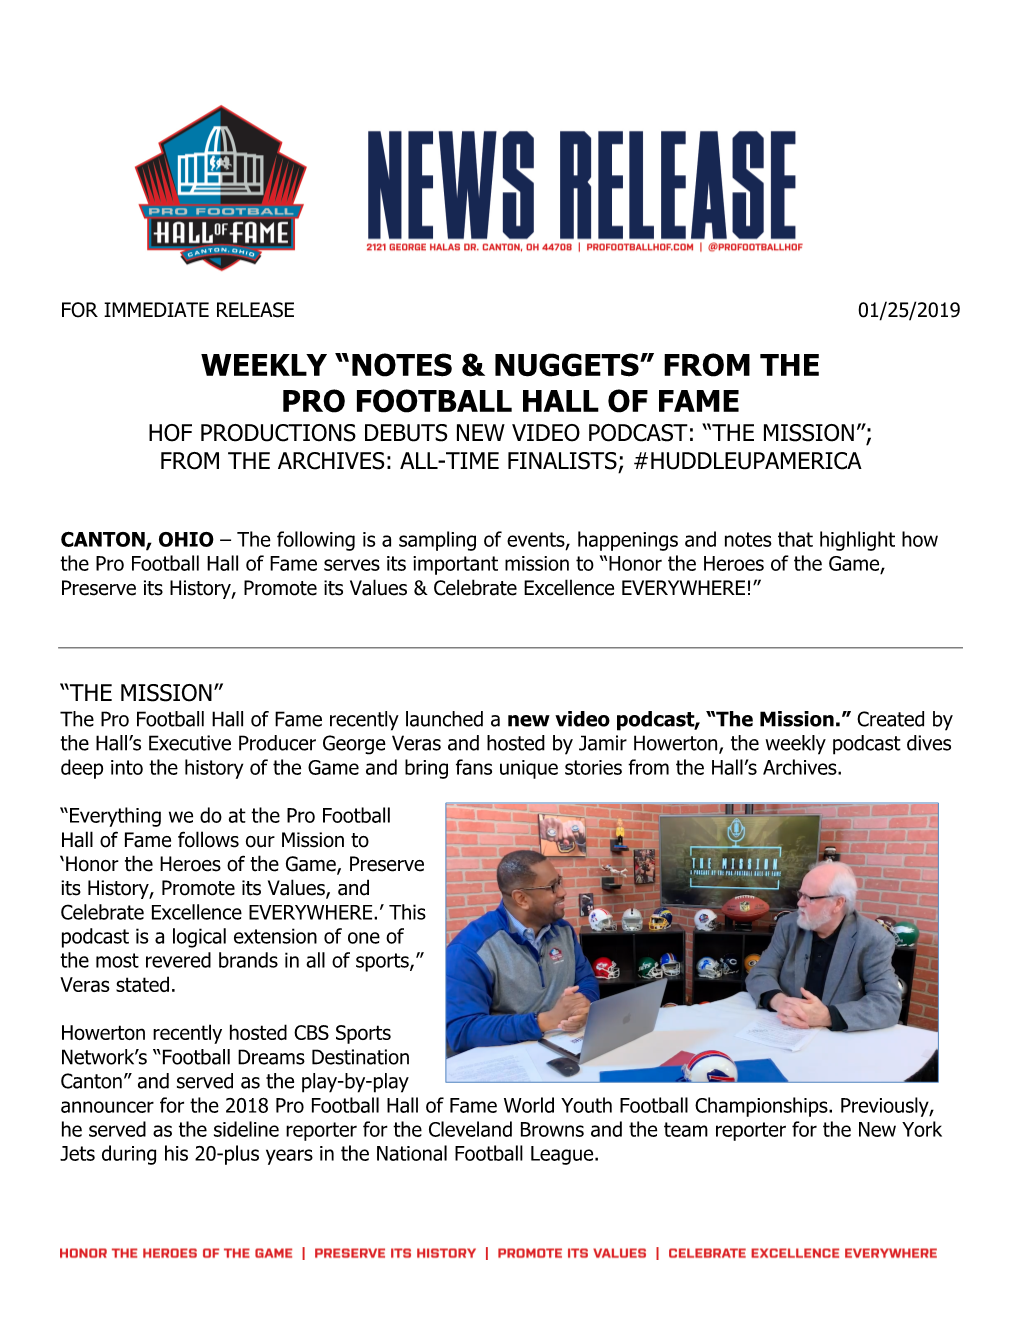 Weekly “Notes & Nuggets” from the Pro Football Hall